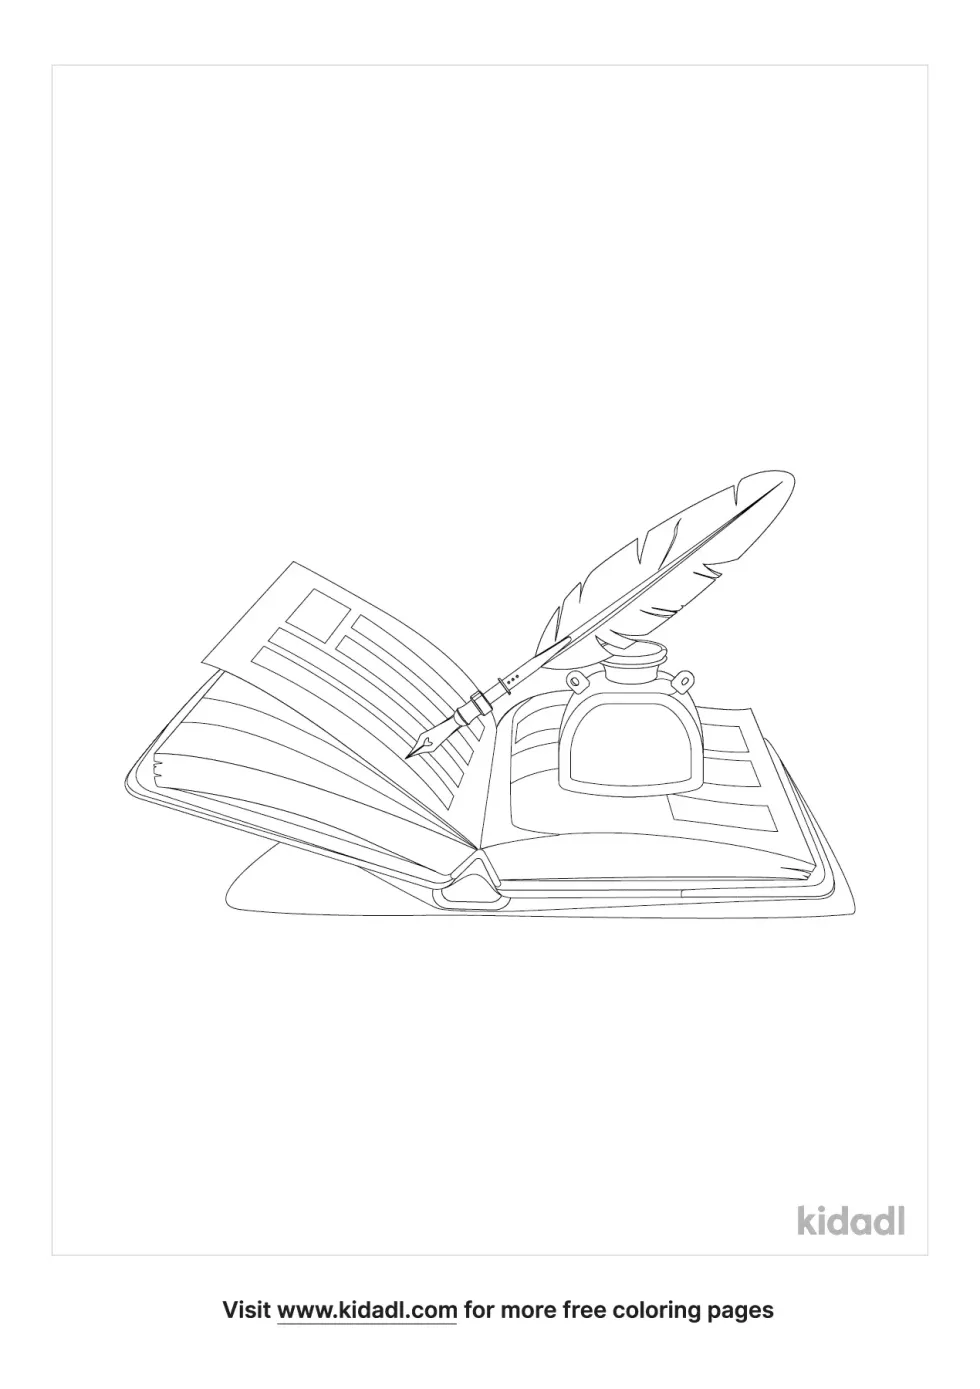 Book And Feather Pen Coloring Page